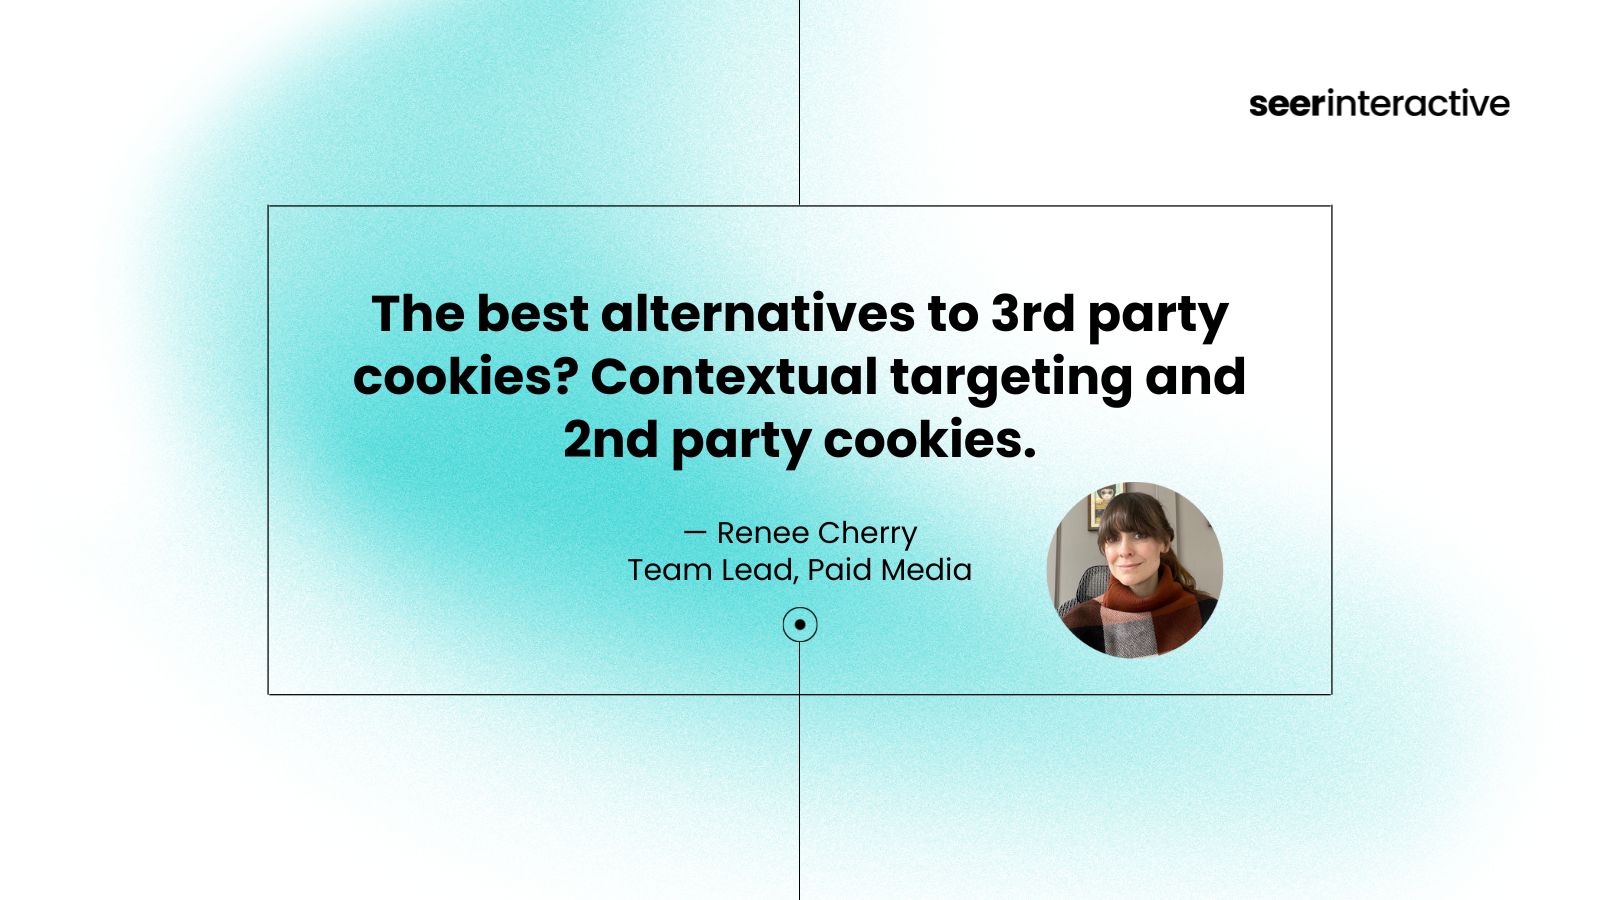 Creating a Marketing Strategy That Doesn’t Rely on 3rd-Party Cookies